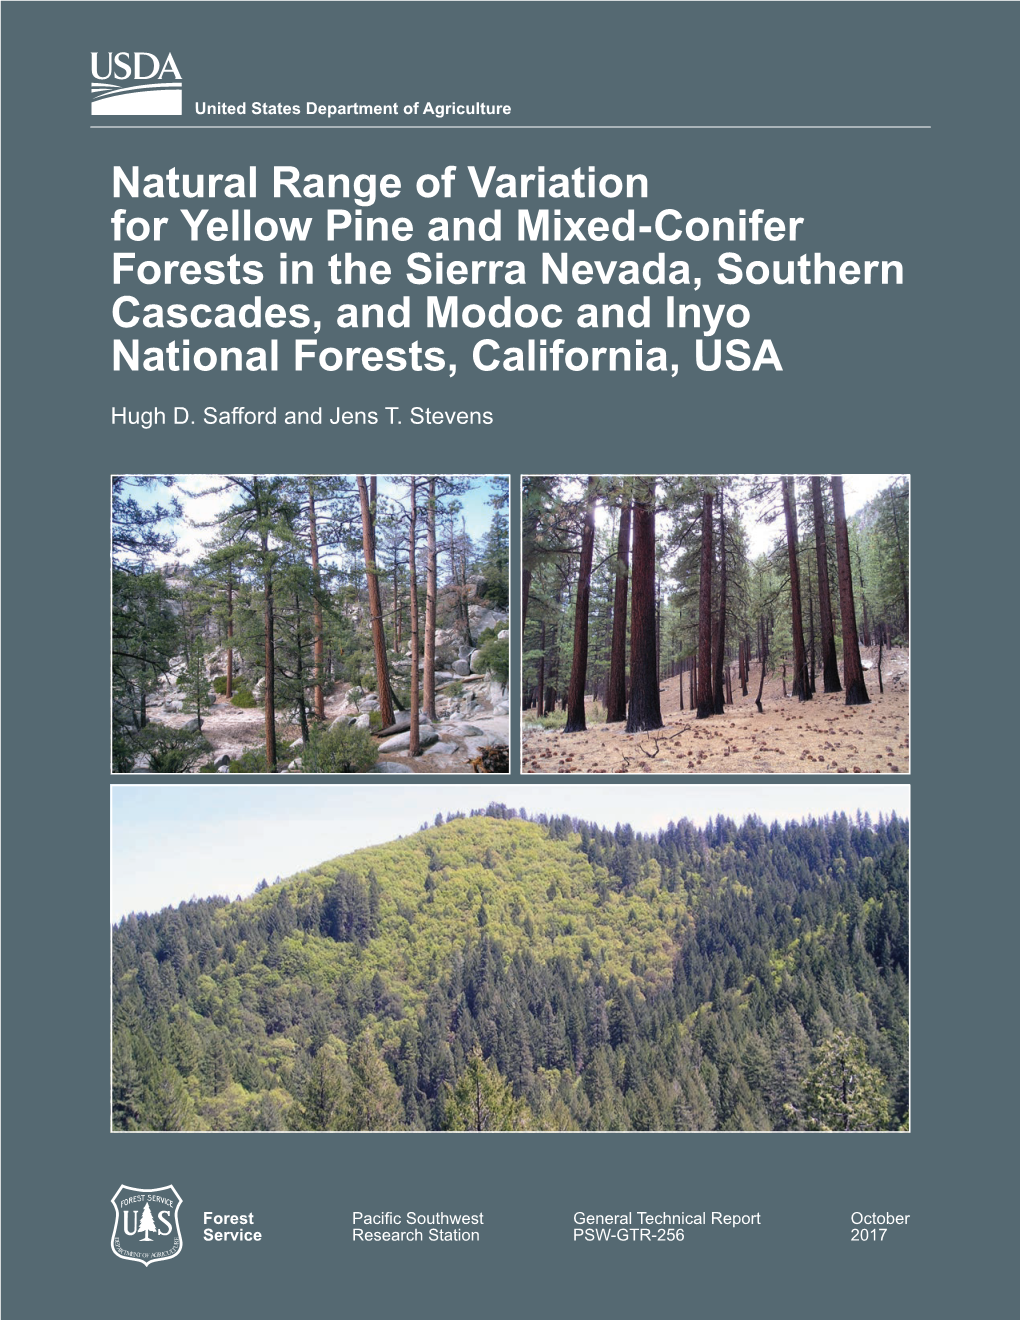 Natural Range of Variation for Yellow Pine And